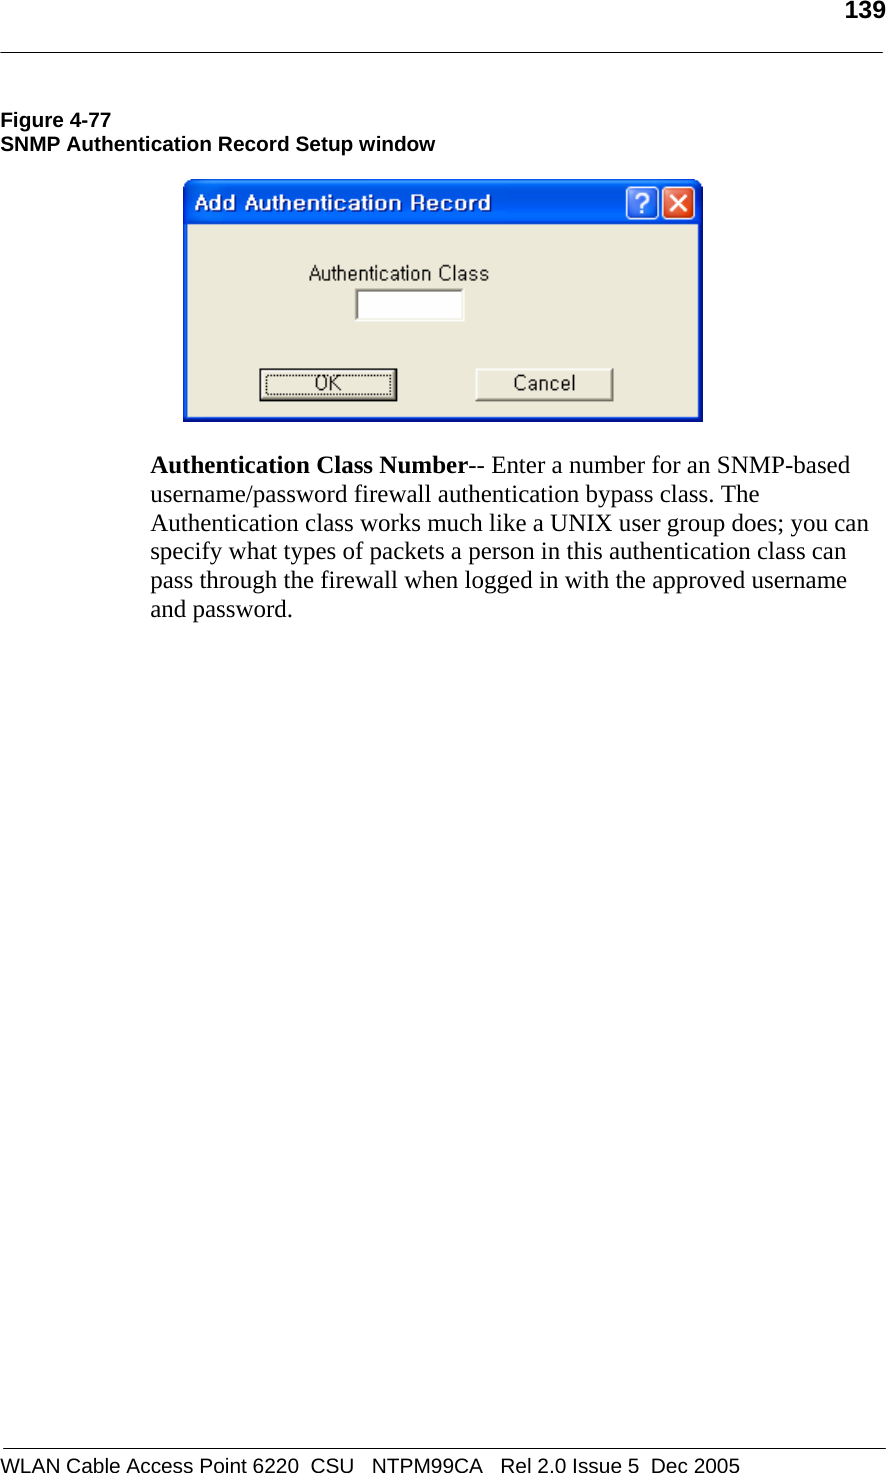   139  WLAN Cable Access Point 6220  CSU   NTPM99CA   Rel 2.0 Issue 5  Dec 2005 Figure 4-77 SNMP Authentication Record Setup window    Authentication Class Number-- Enter a number for an SNMP-based username/password firewall authentication bypass class. The Authentication class works much like a UNIX user group does; you can specify what types of packets a person in this authentication class can pass through the firewall when logged in with the approved username and password.    